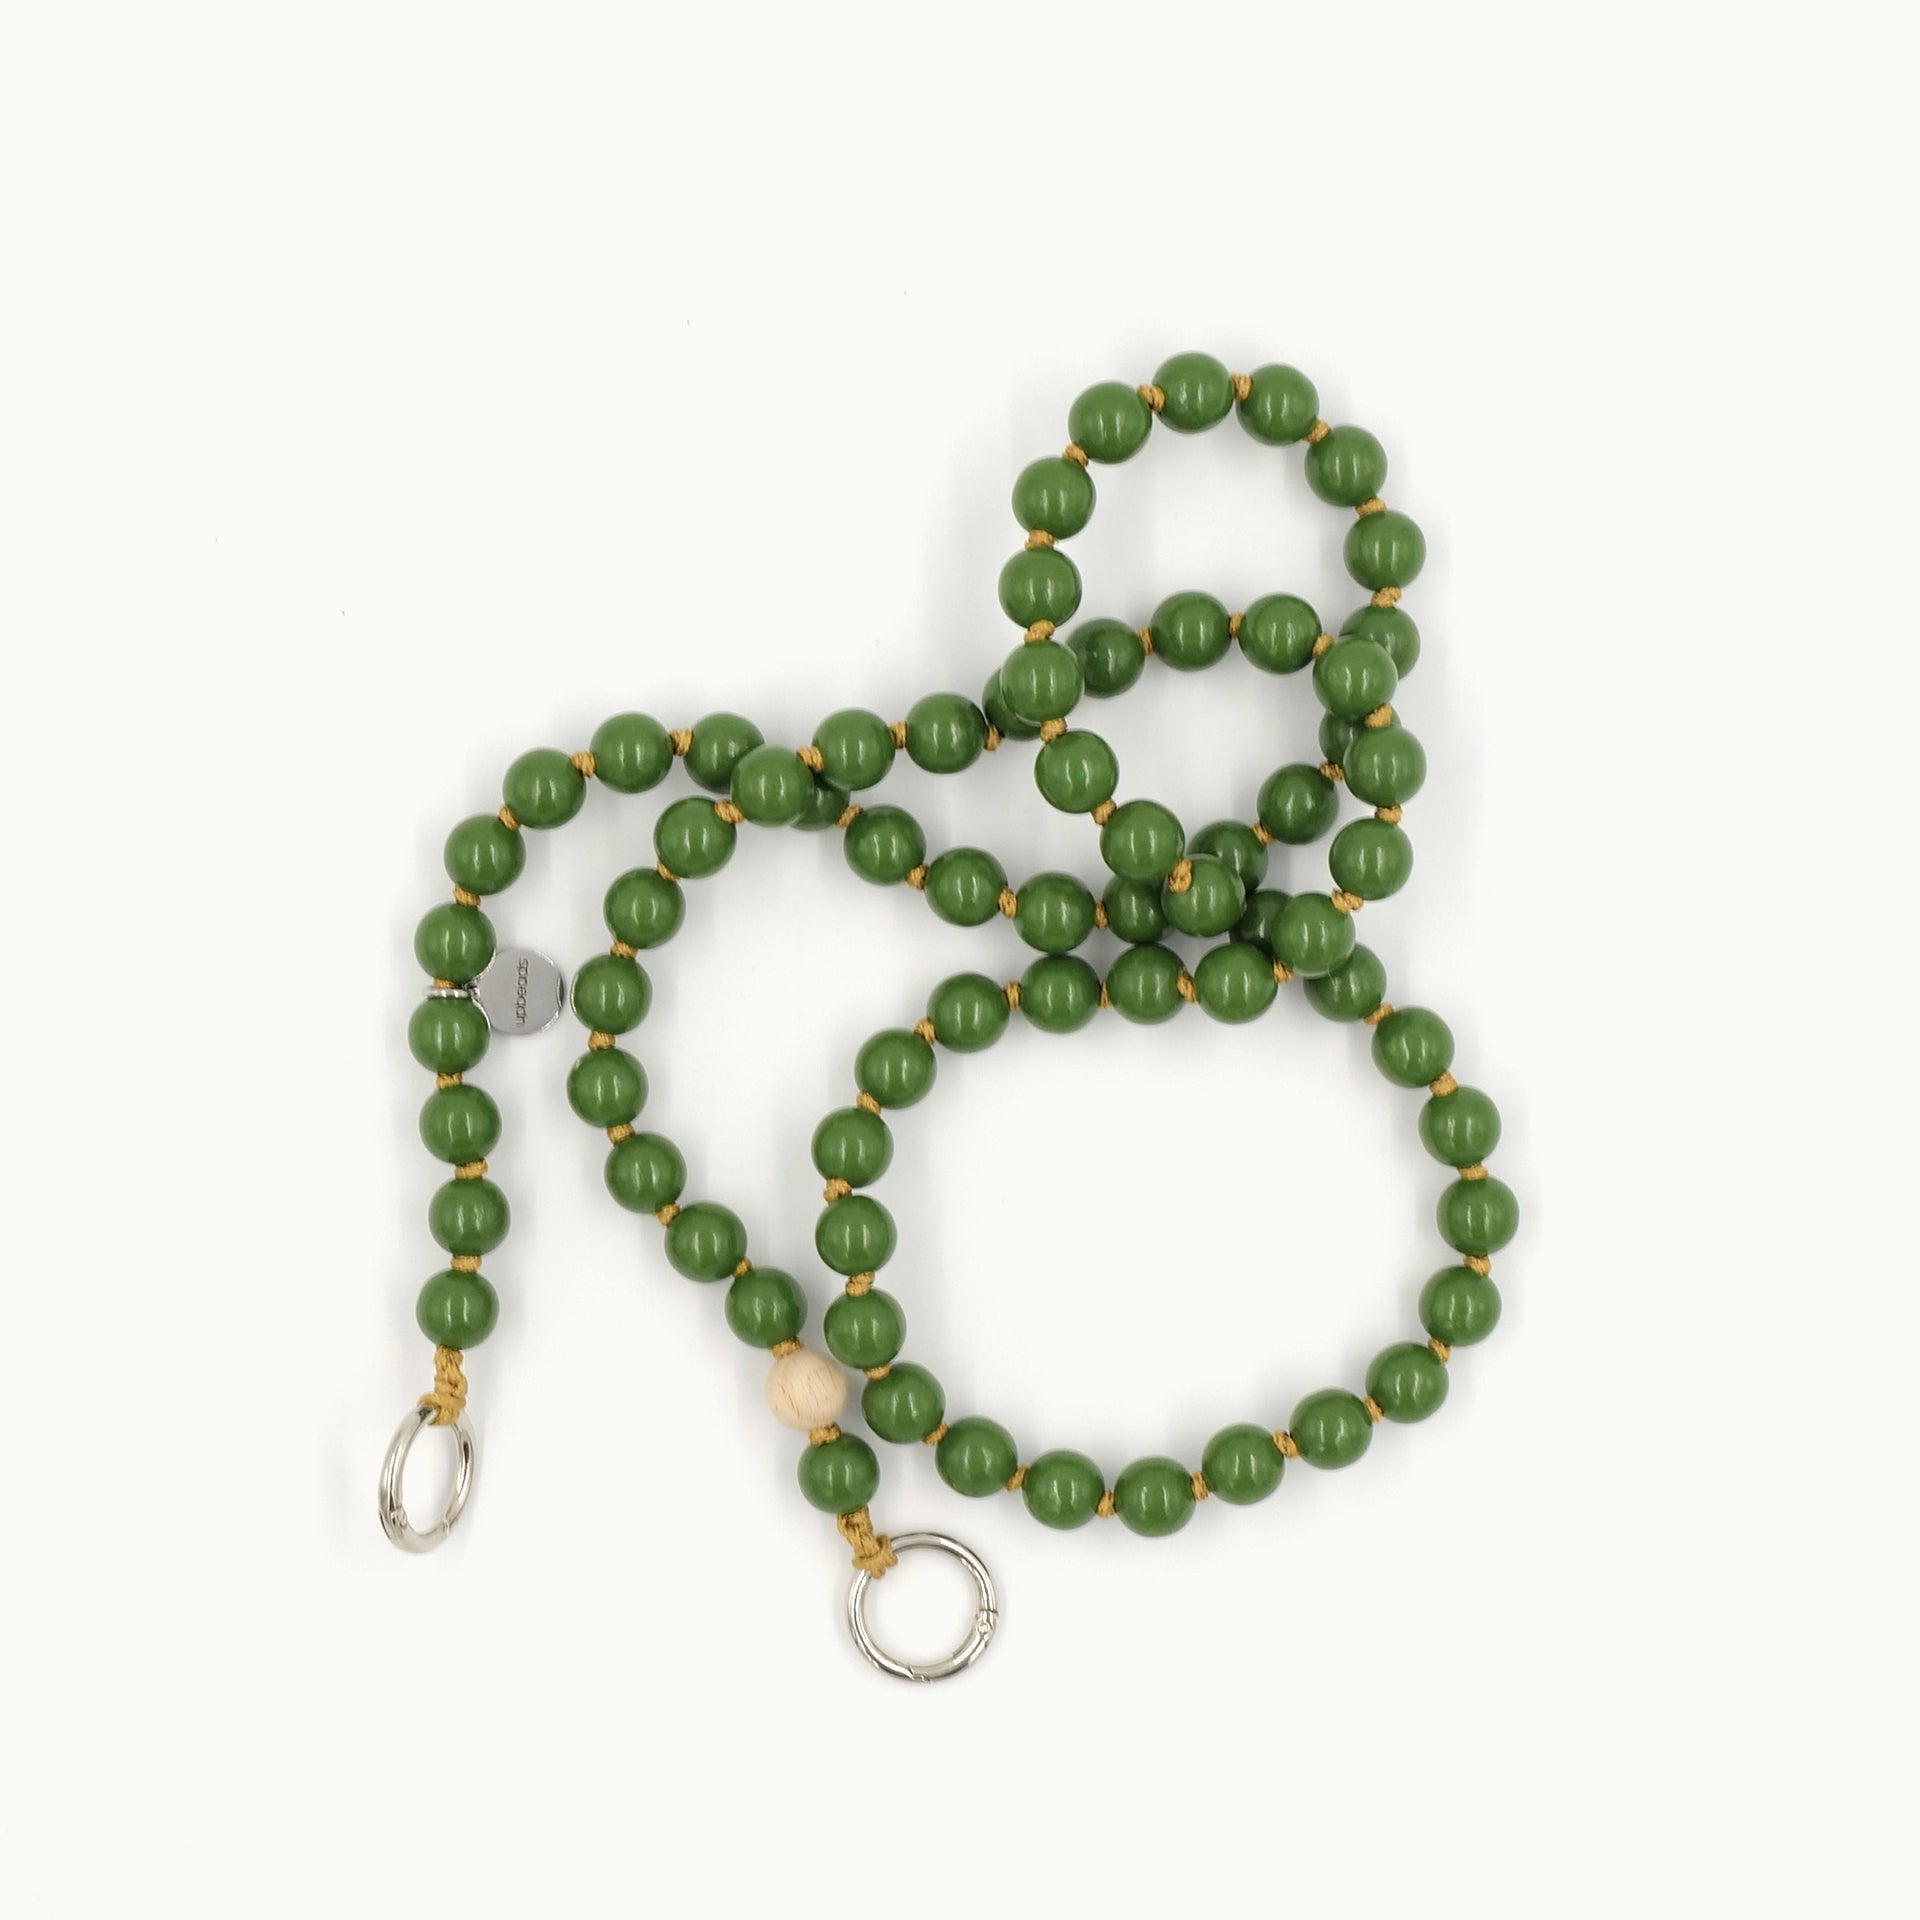 OLIVE CROSSBODY BEADS CHAIN by UPBEADS